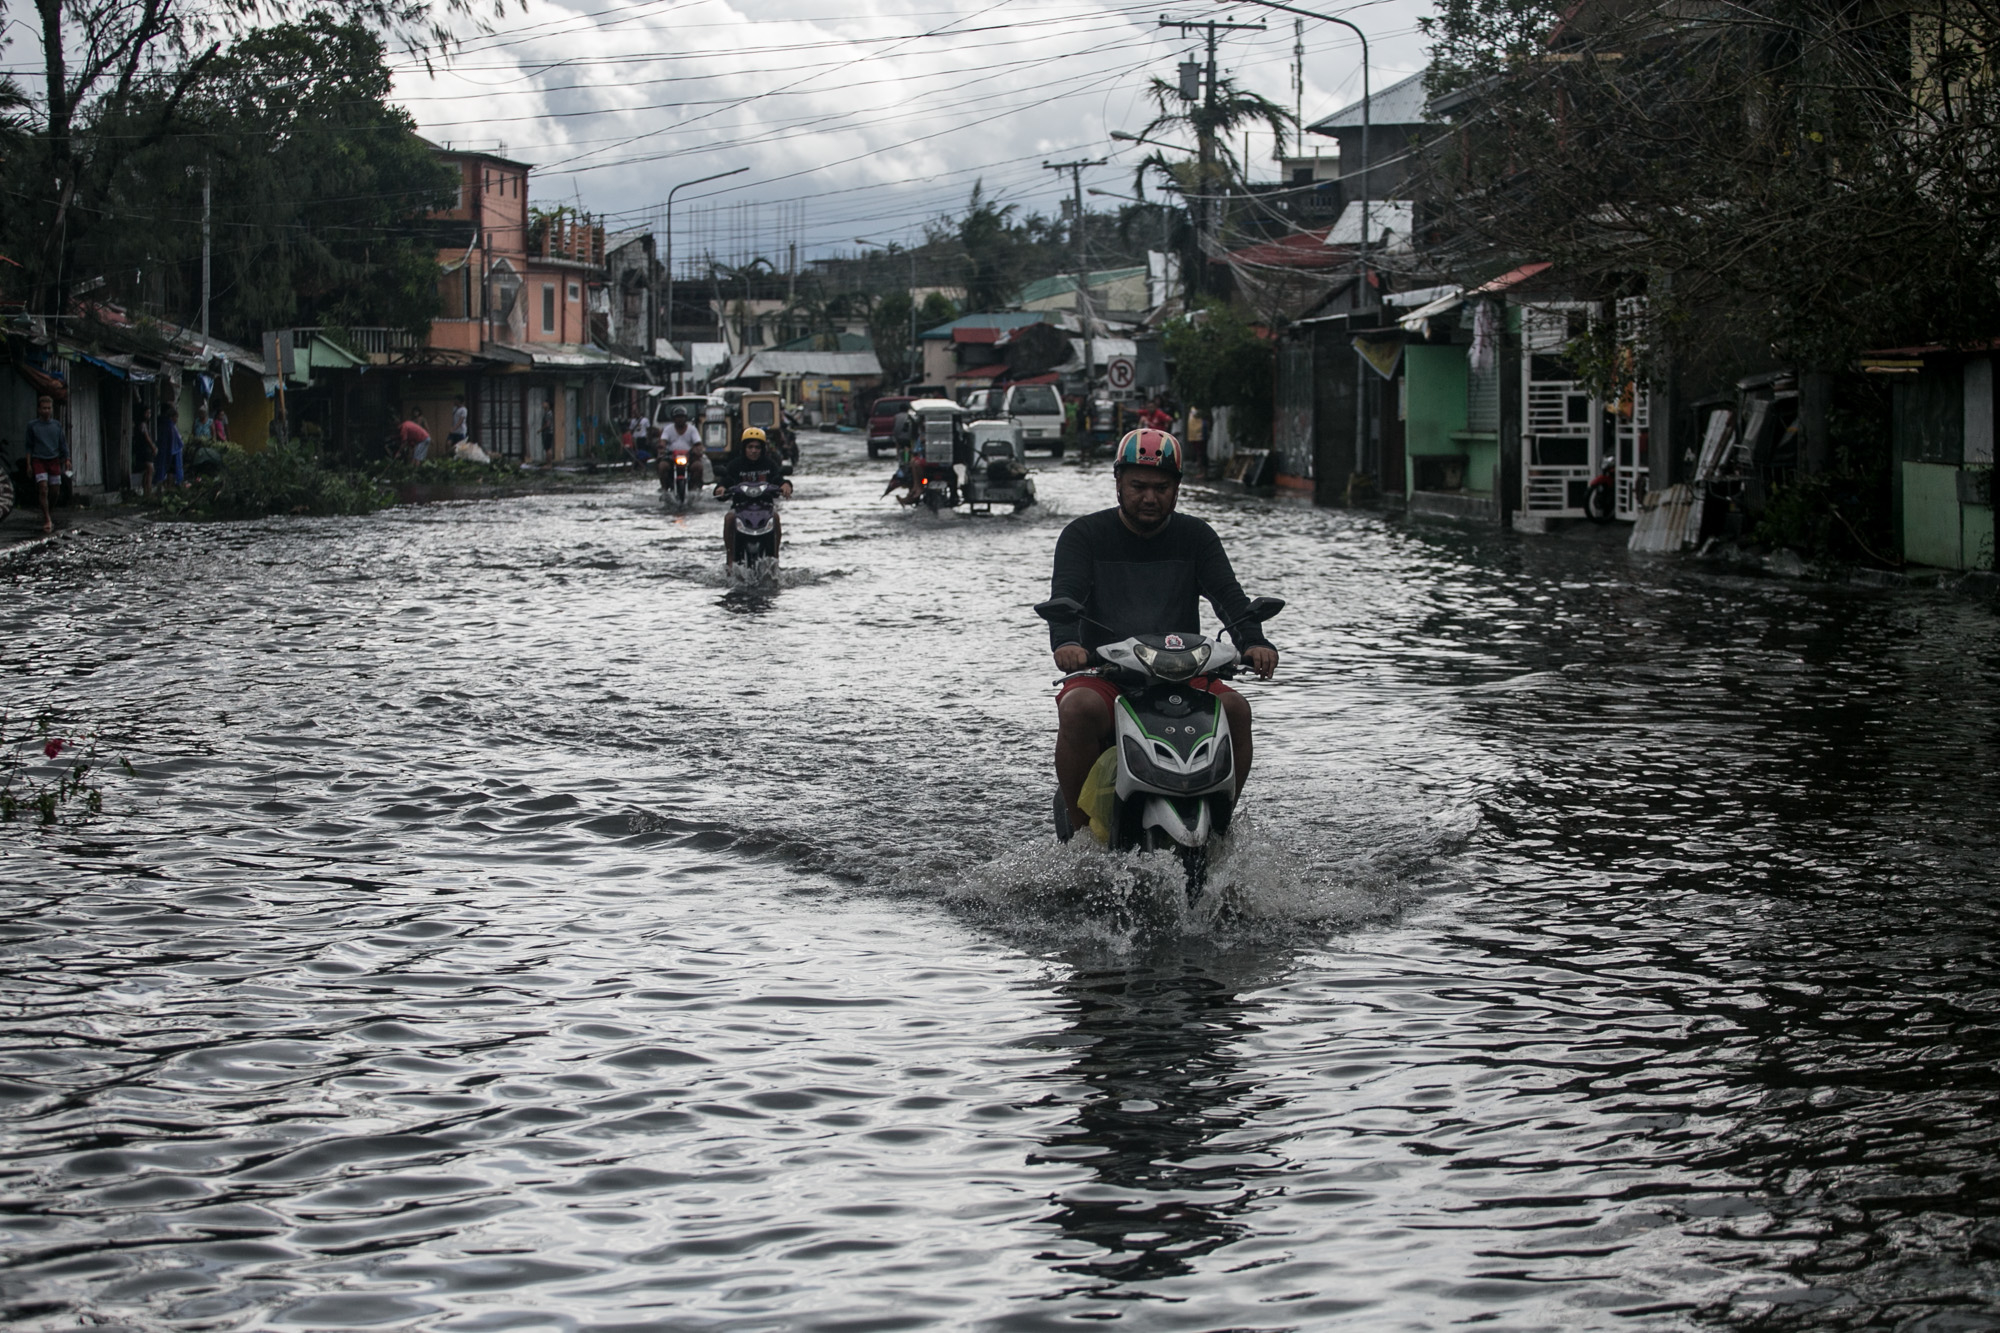 Motorists wade through a flooded street in the Philippines after Typhoon Tisoy